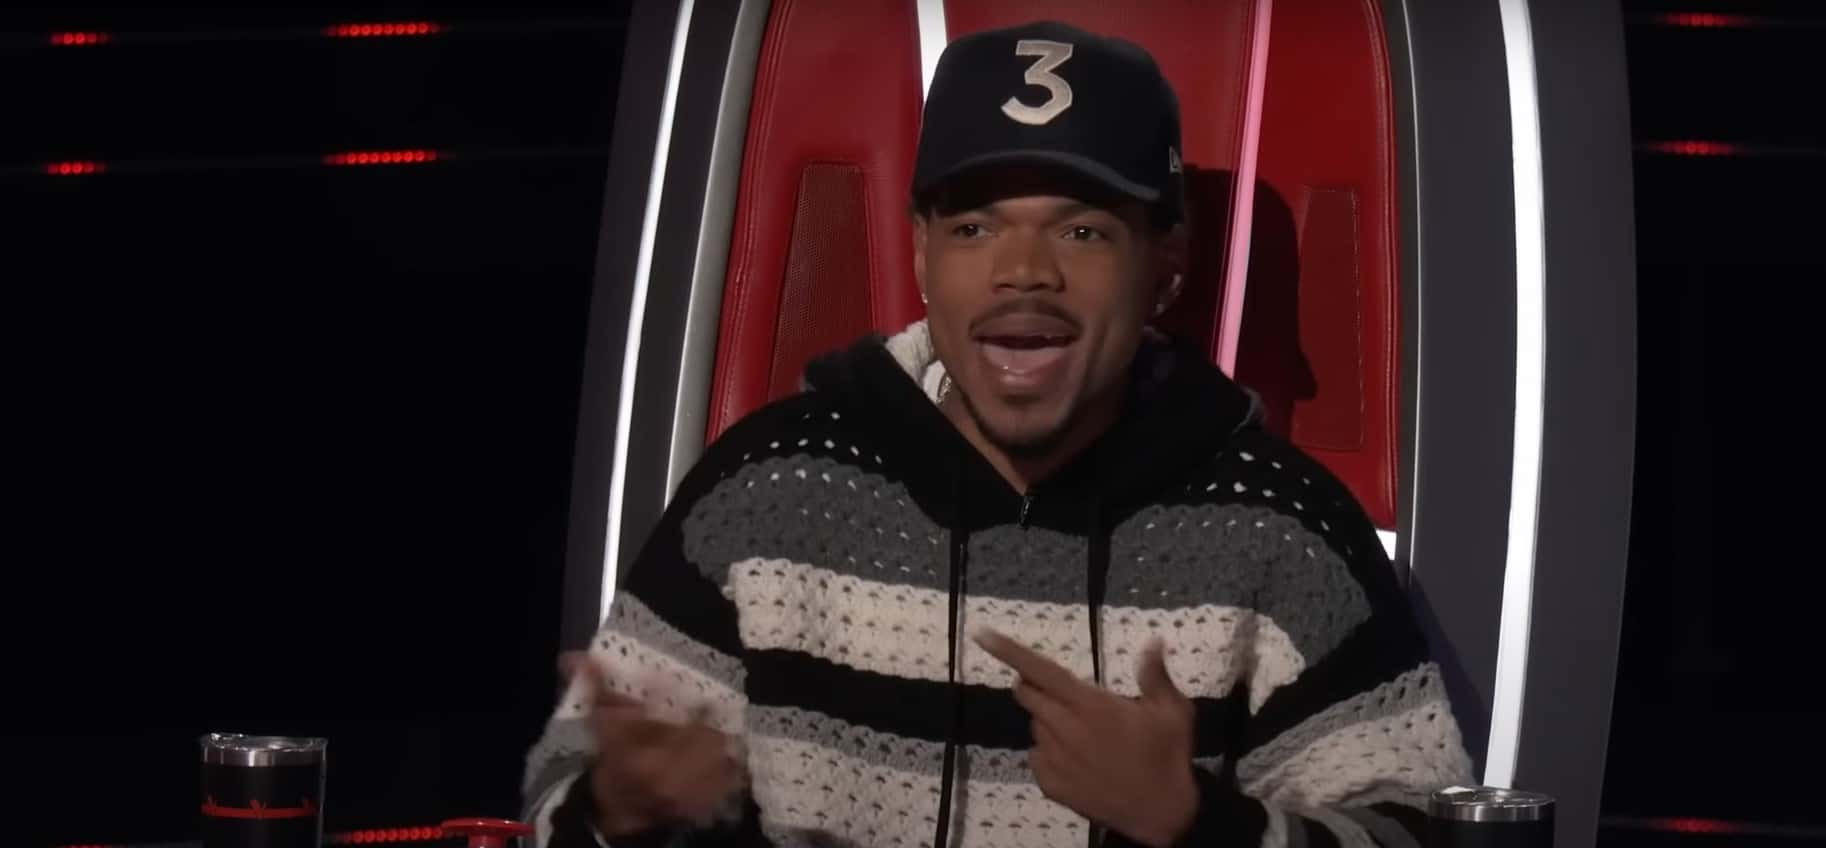 Who is chance on the voice?